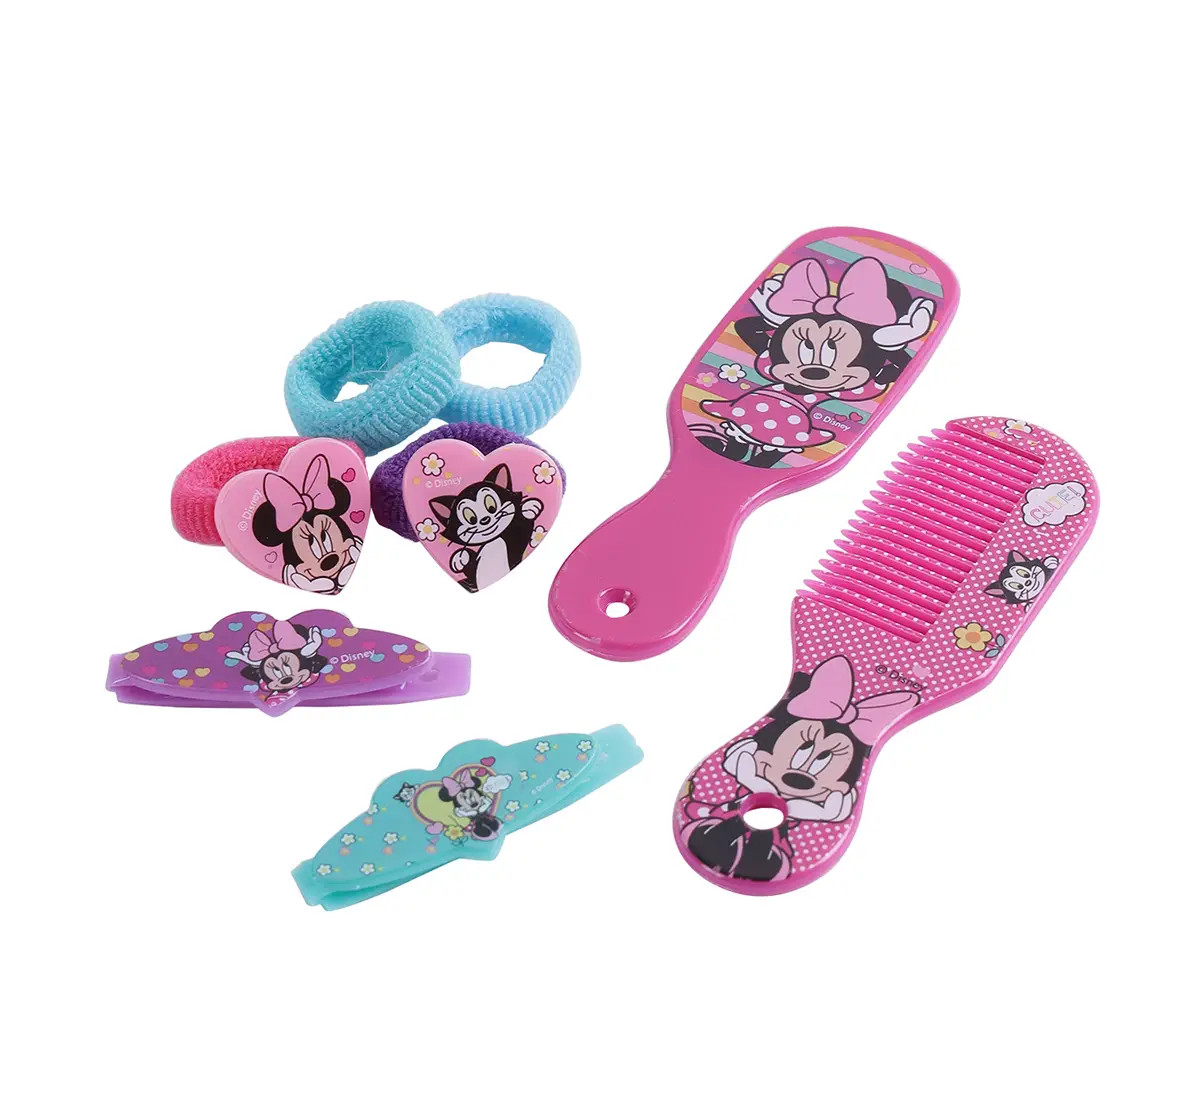 Li'l Diva Minnie Mouse Fashion Accessories Set of 8 with Bag Pink For Girls of Age 3Y+, Multicolour